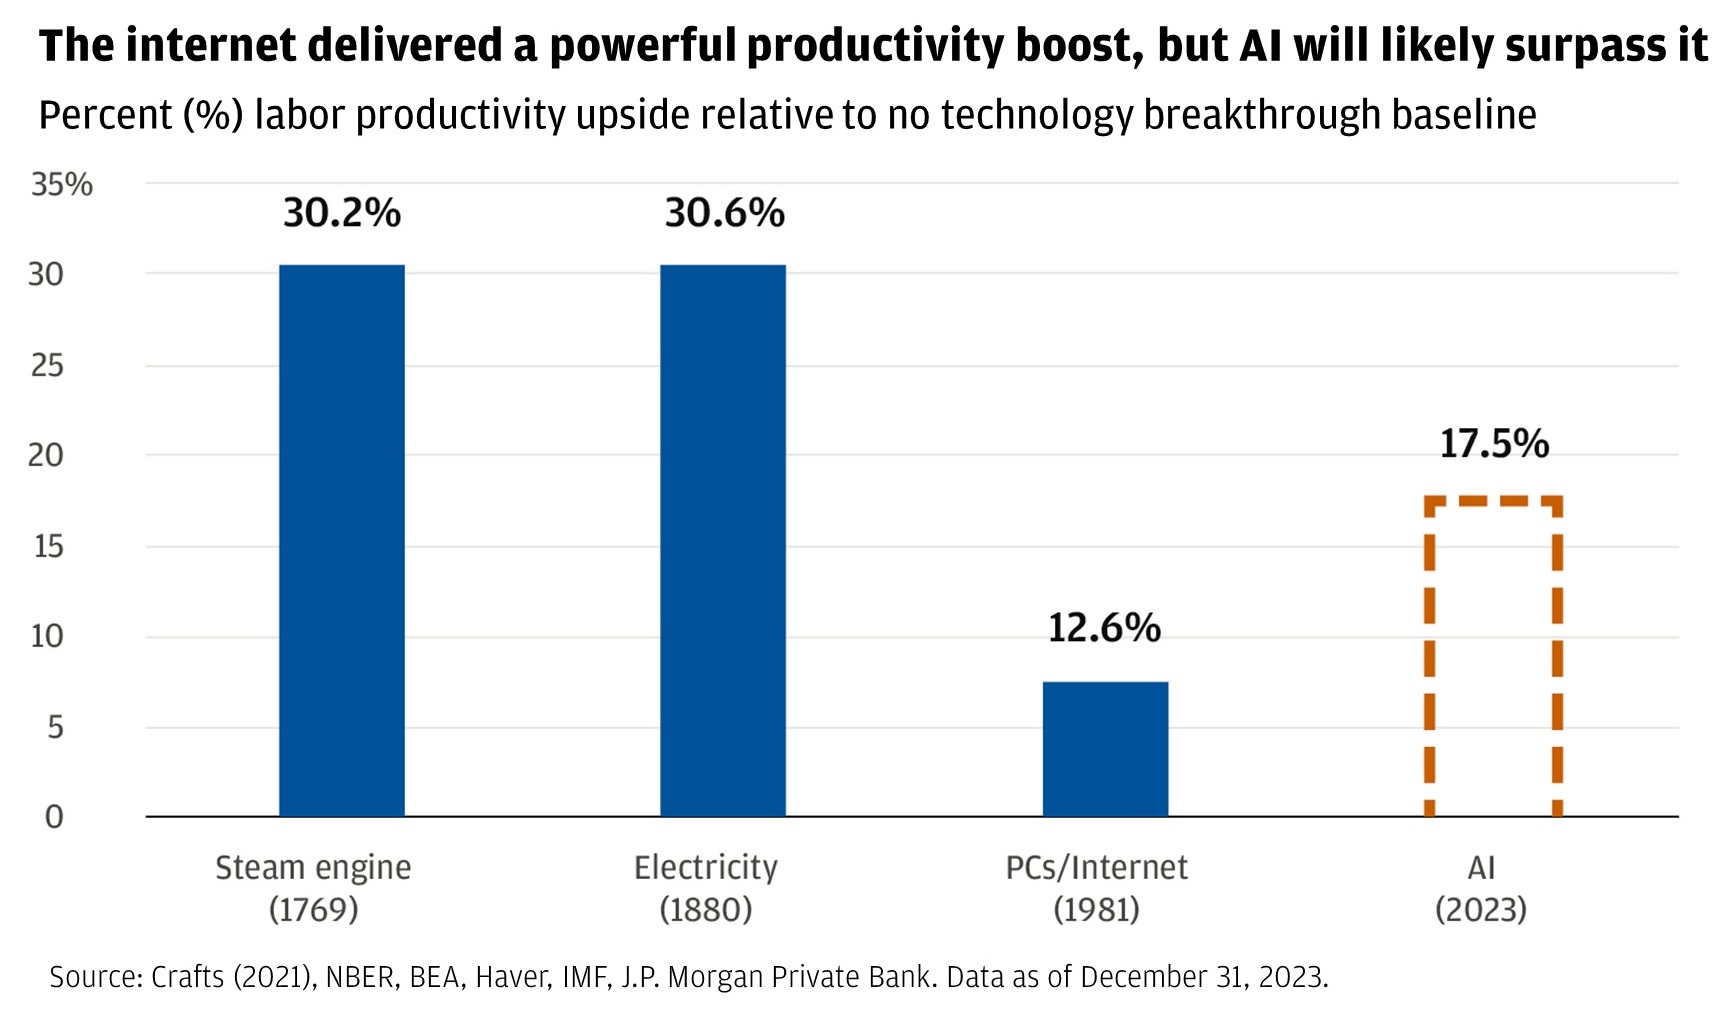 Bar chart describes the percentage of macro productivity upside relative to no technology breakthrough baseline for the steam engine, electricity, PCs and the Internet and AI.